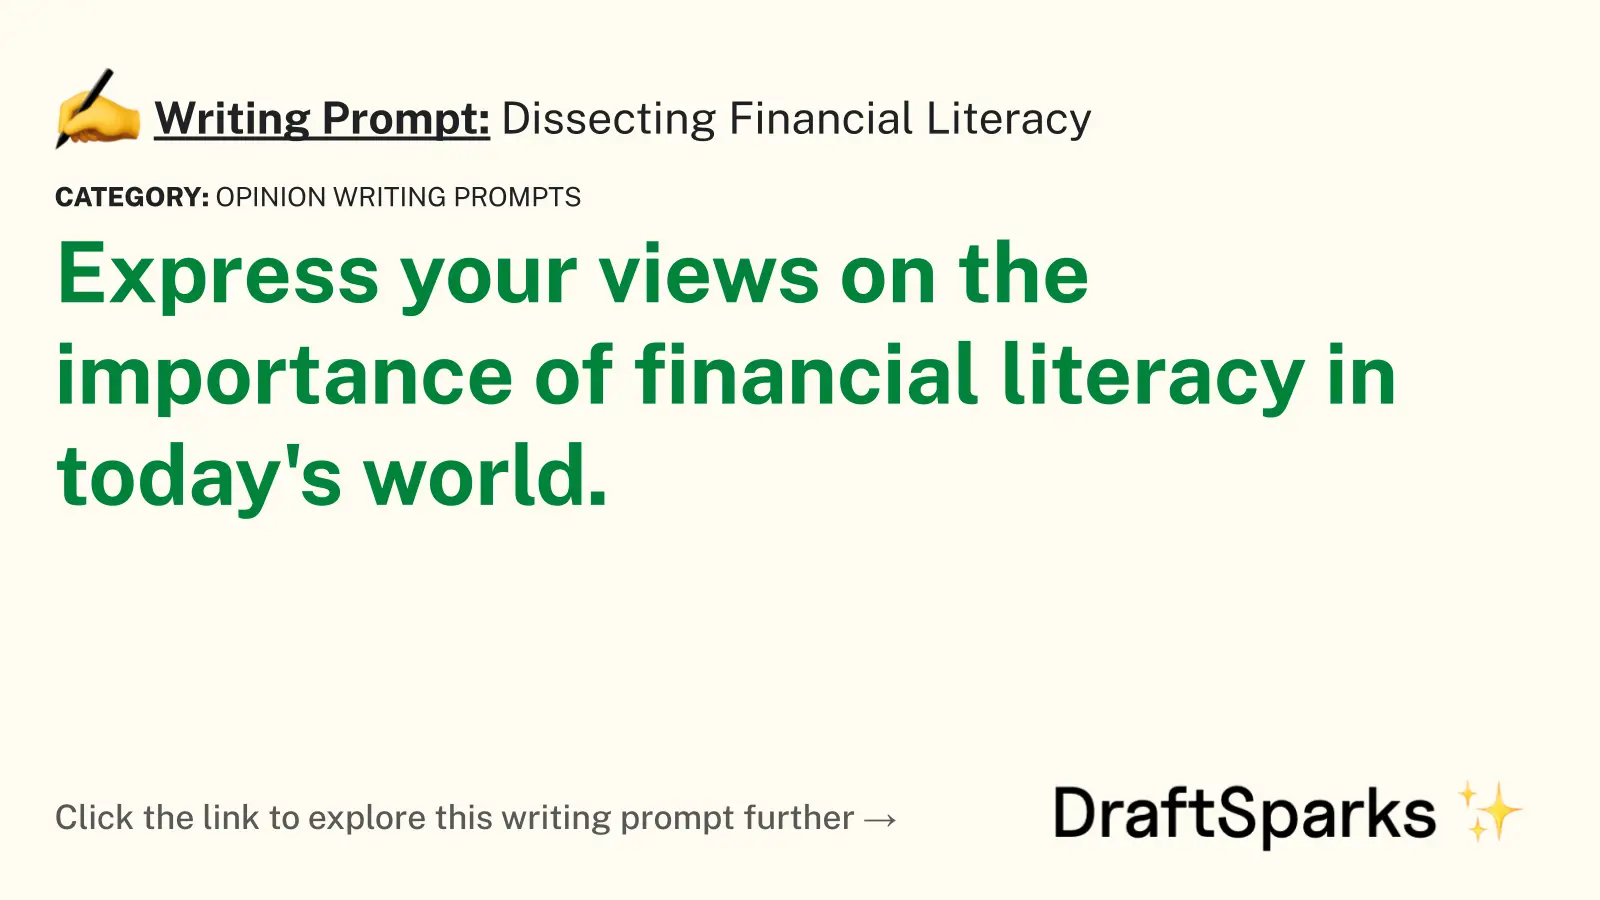 Dissecting Financial Literacy